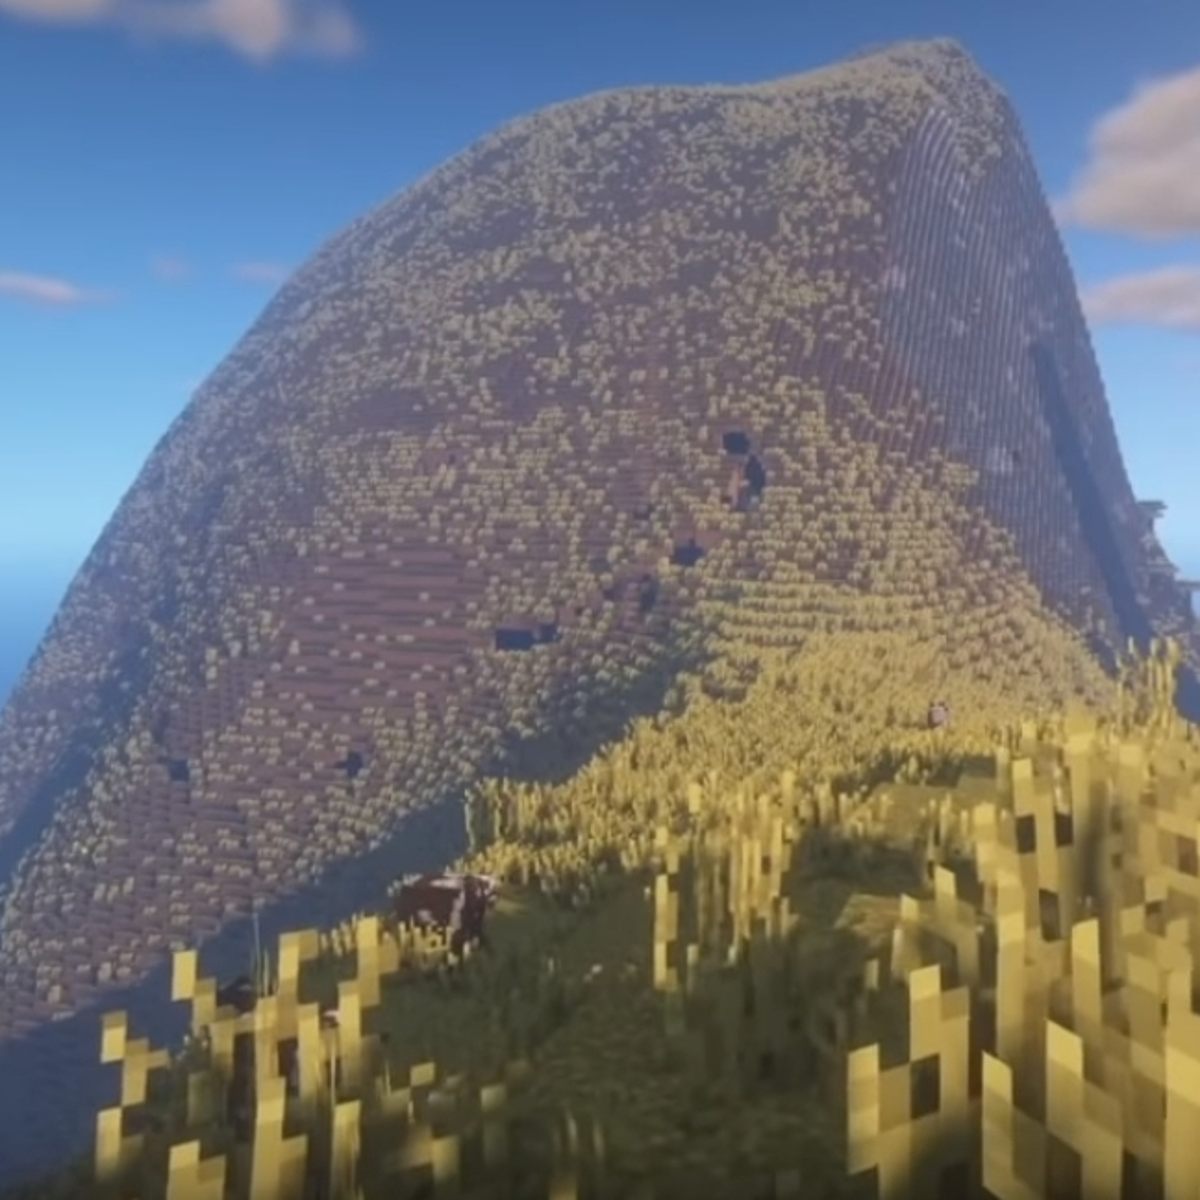 Someone's built the entire Earth in Minecraft - to scale